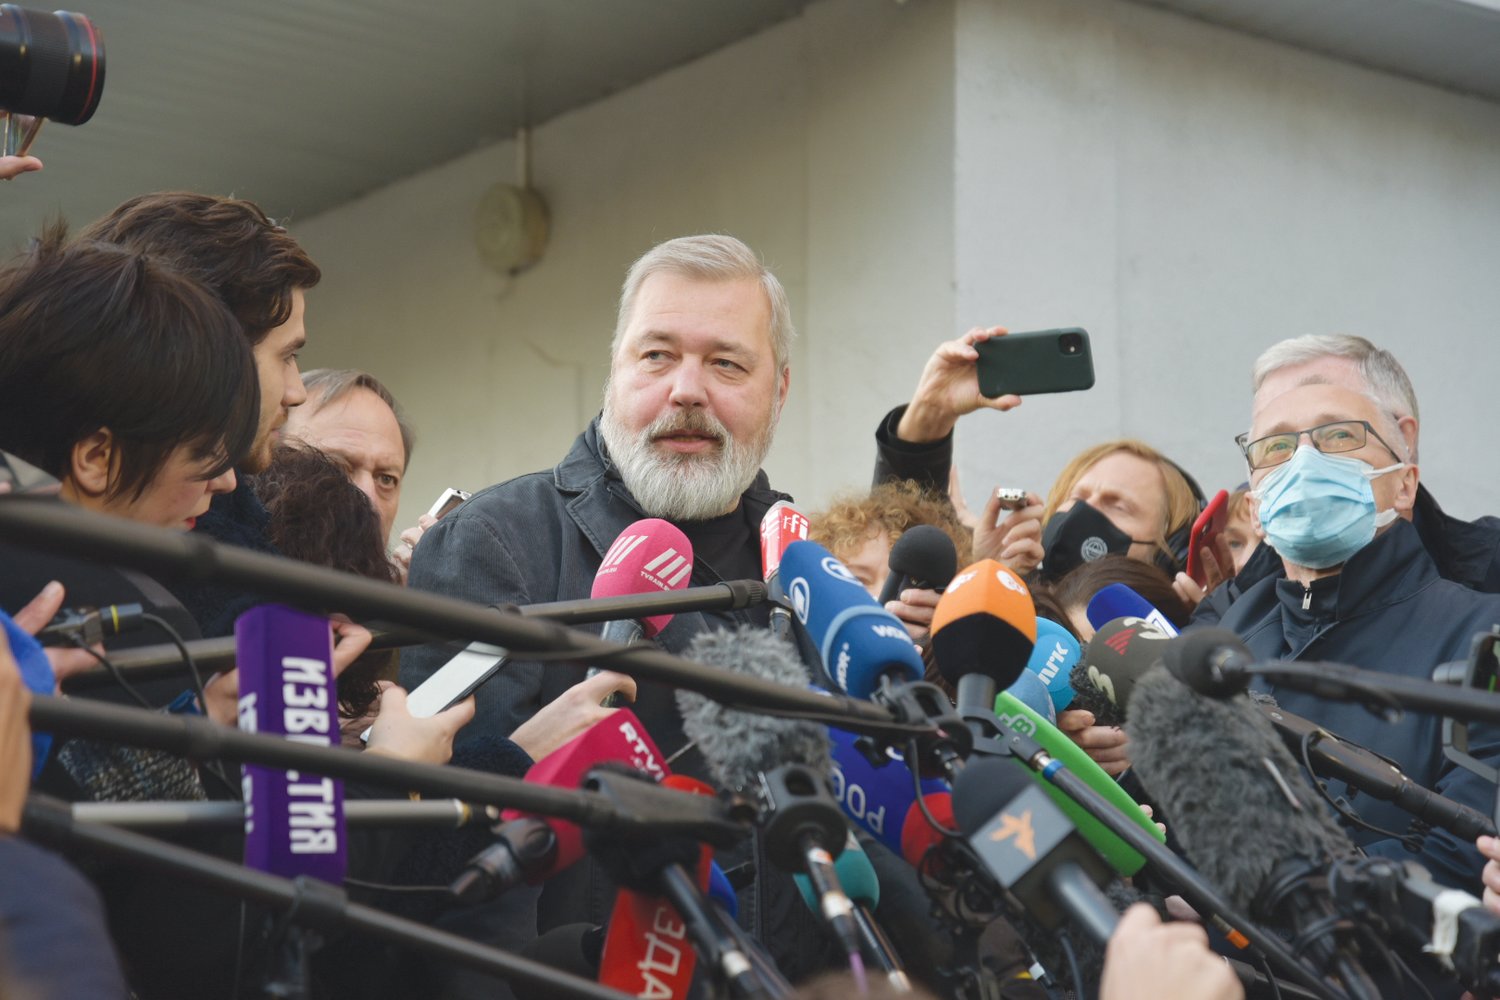 Dmitry Muratov, editor-in-chief of the Moscow newspaper Novaya Gazeta who shared in the 2021 Nobel Peace Prize, has seen more than his share of human rights violations and trauma. Six of his staff members have been murdered, and his newspaper offices have been sprayed with chemicals.